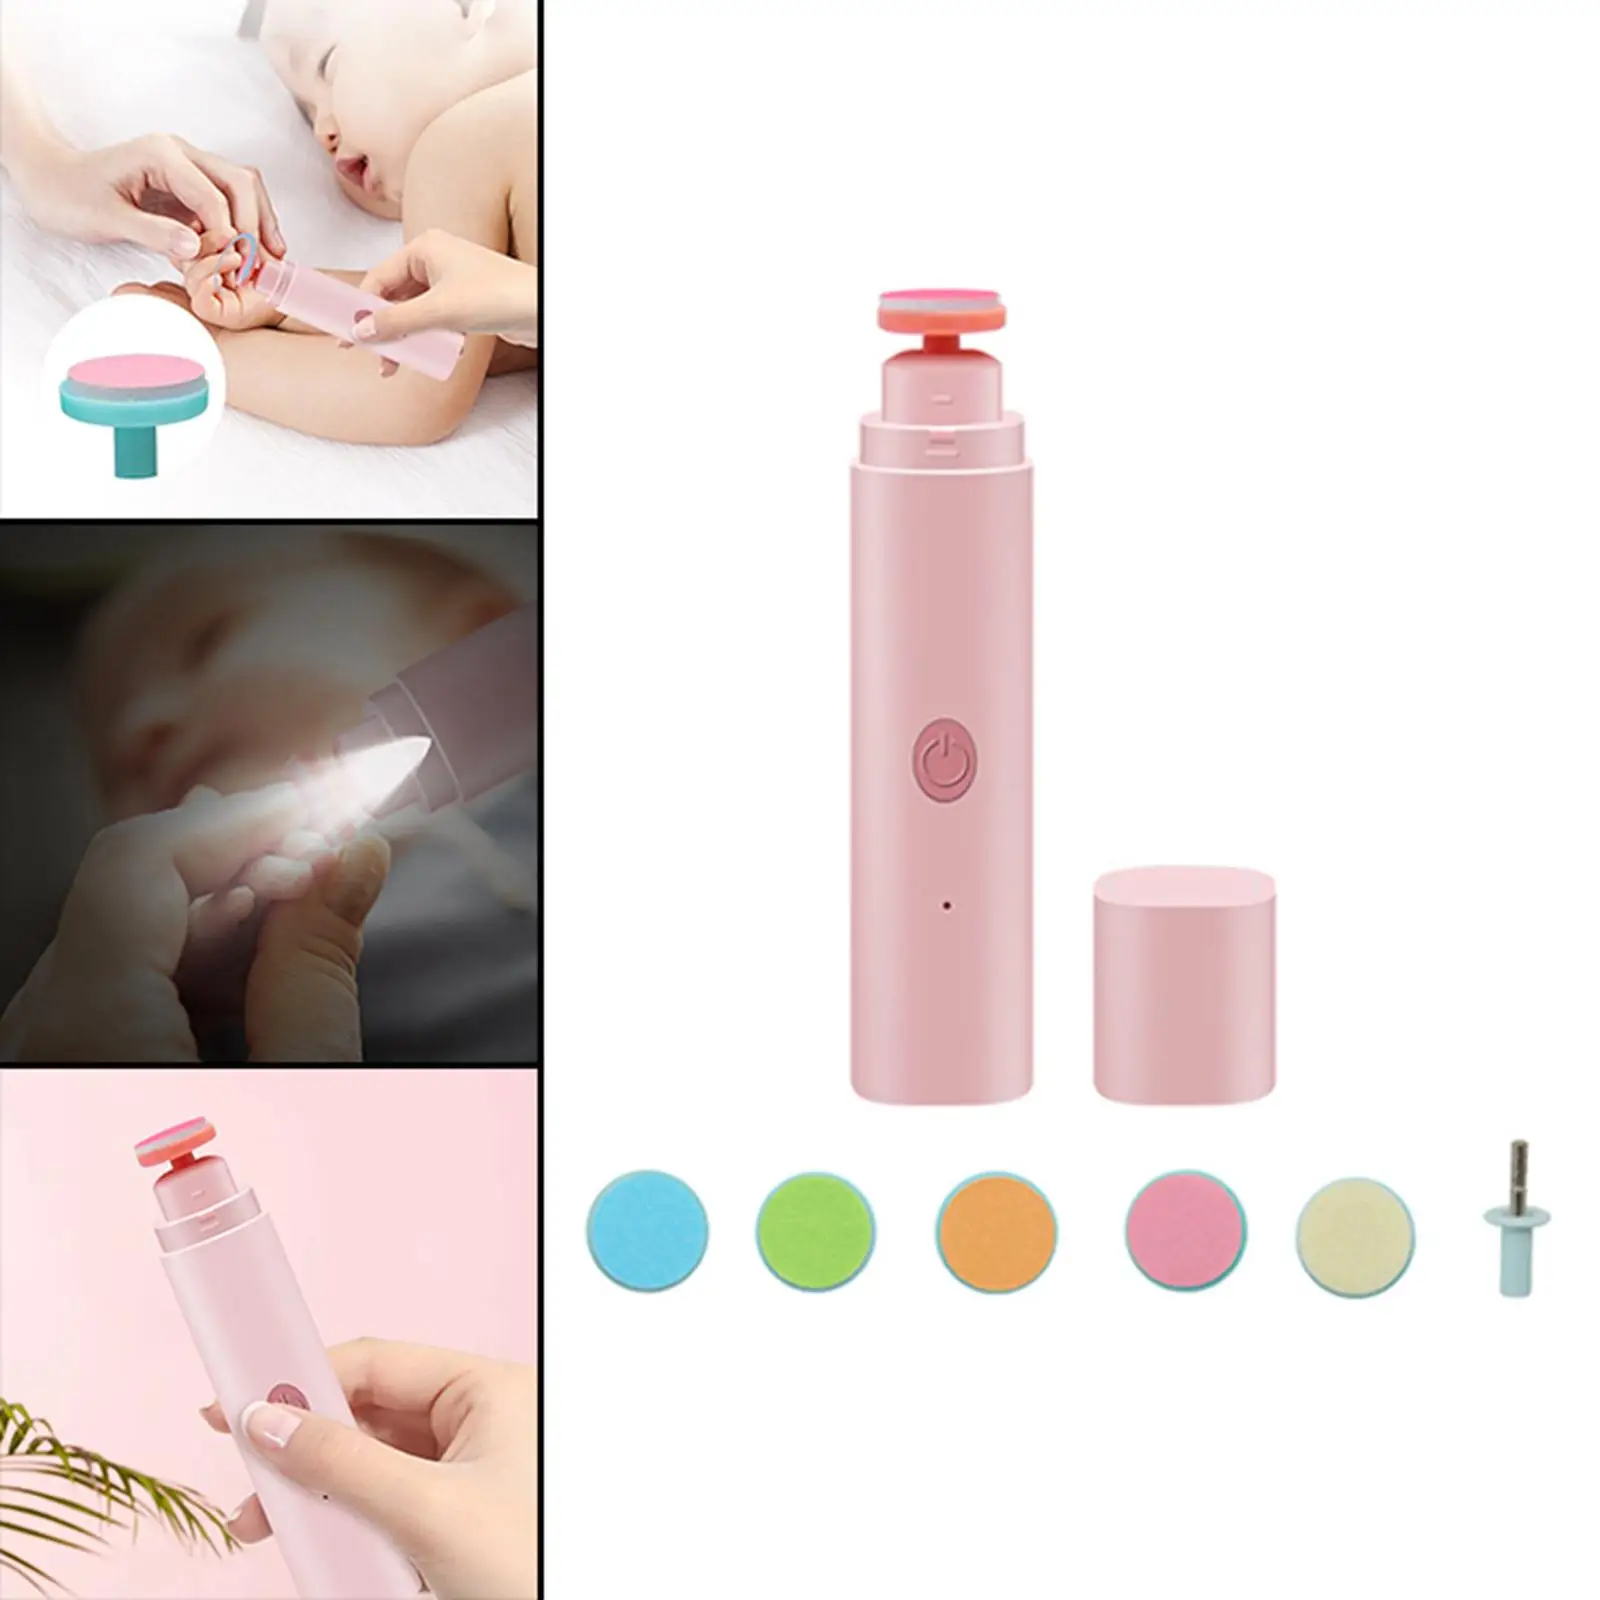 Nail File Drill for Baby Safe Manicure Care Grooming for Infant Kids Adults